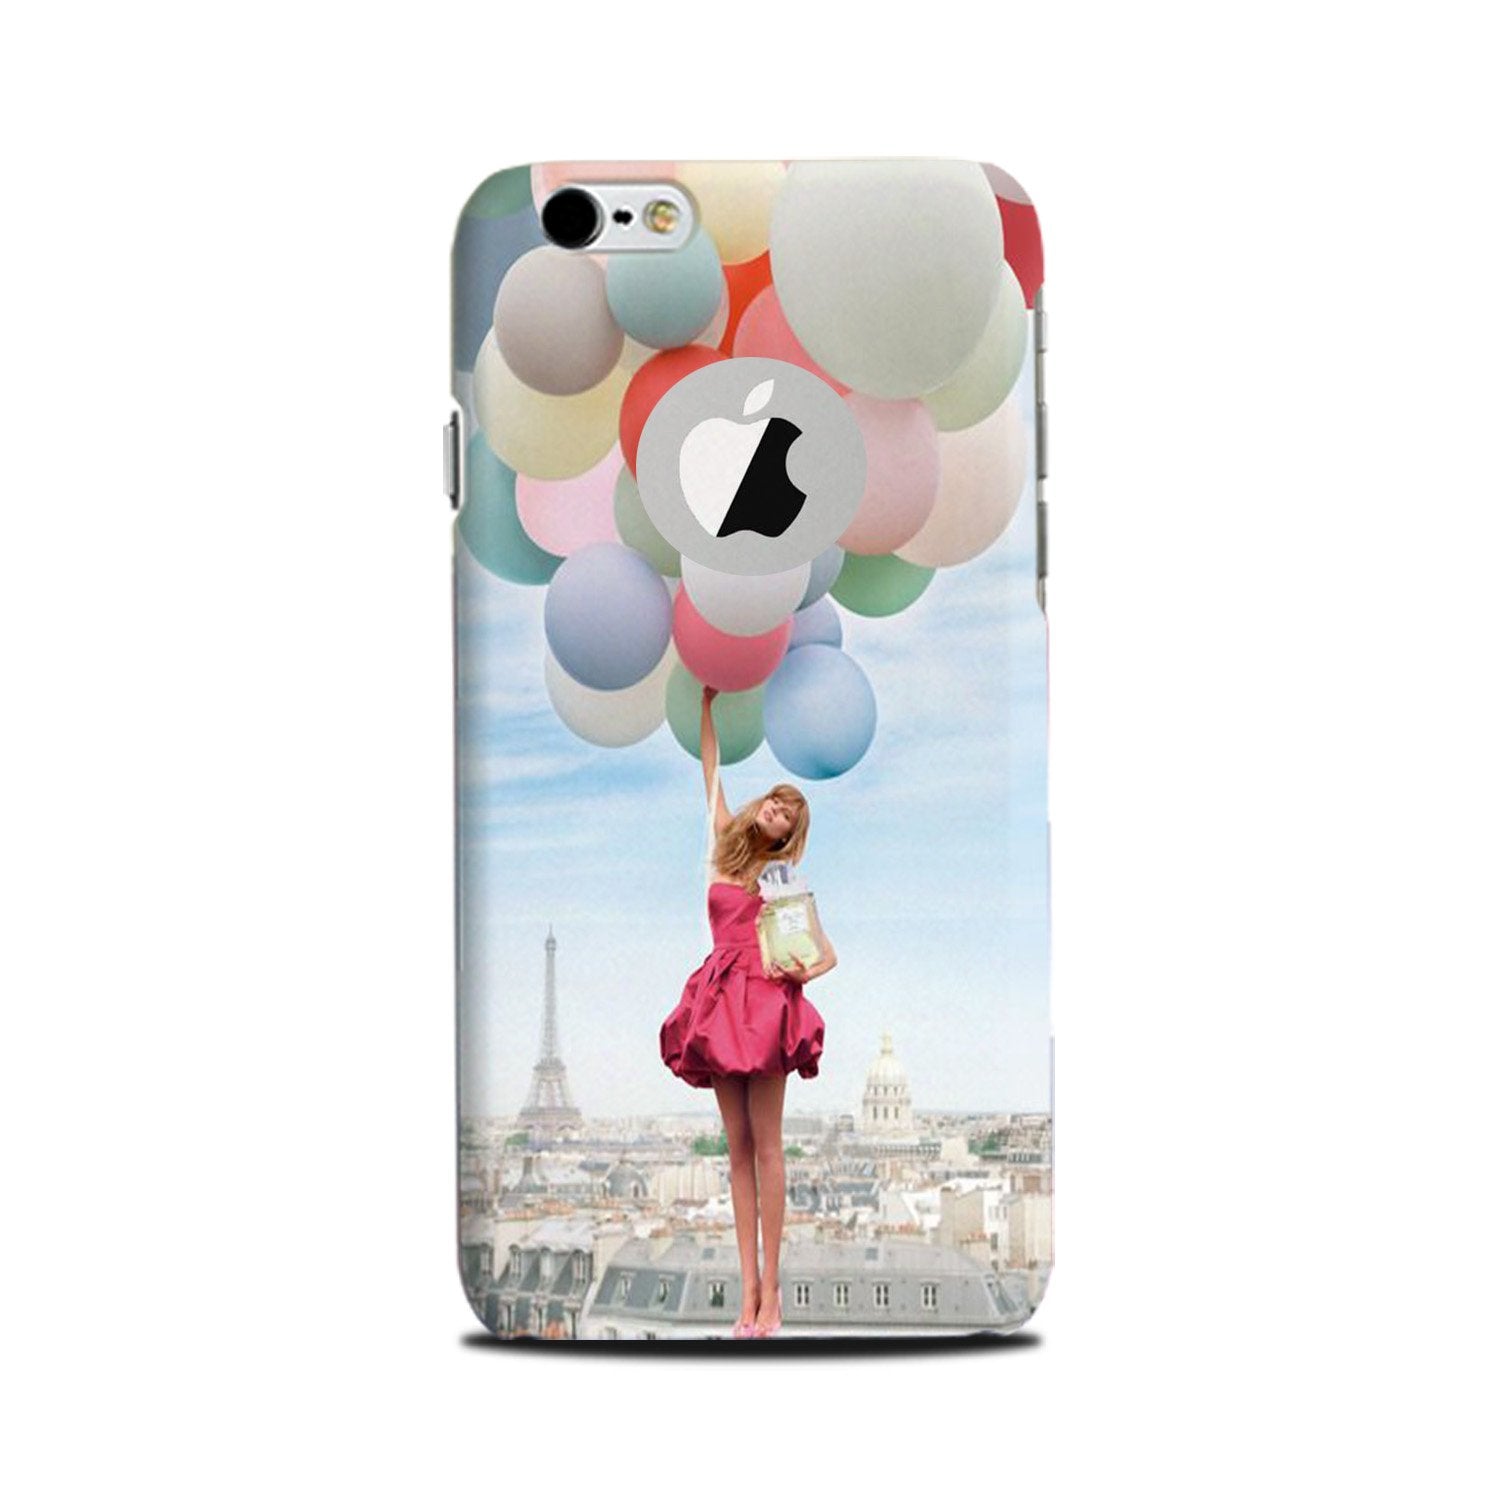 Girl with Baloon Case for iPhone 6 Plus / 6s Plus logo cut 